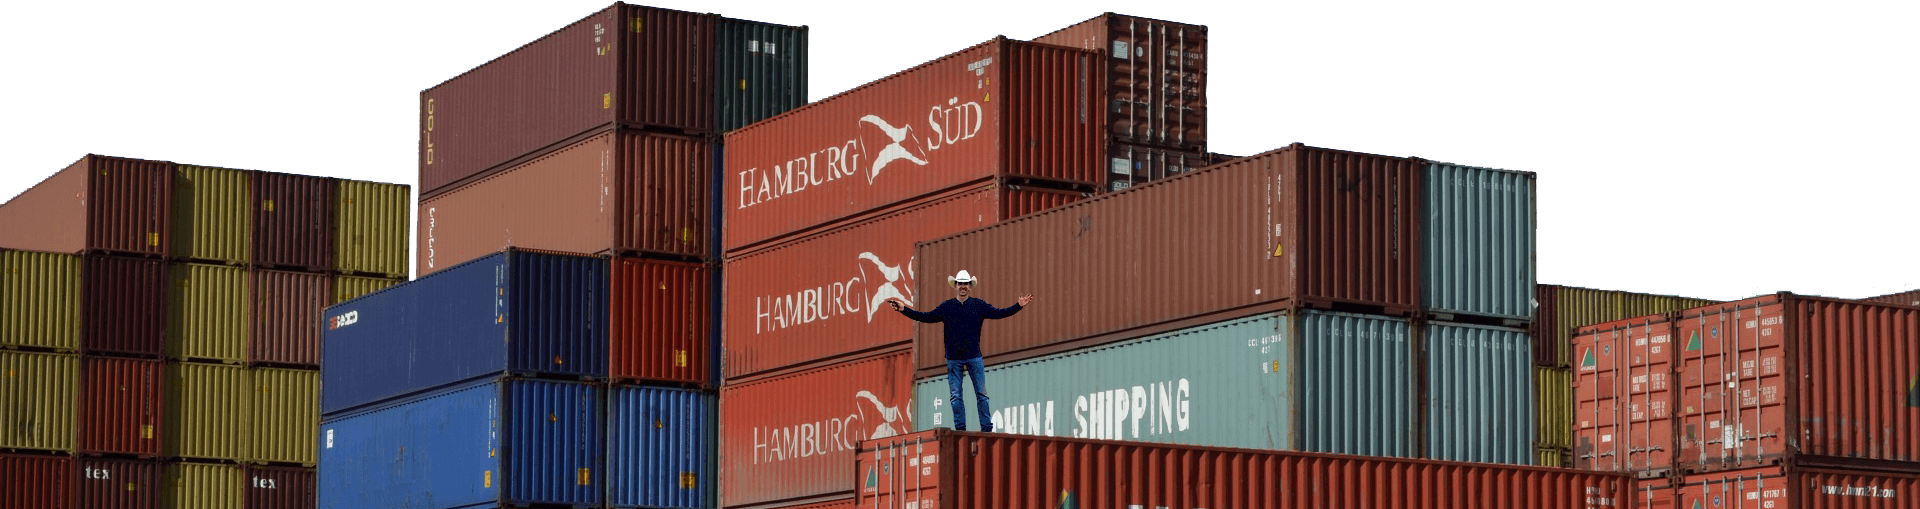 Danny Used Shipping Container Depot Sale